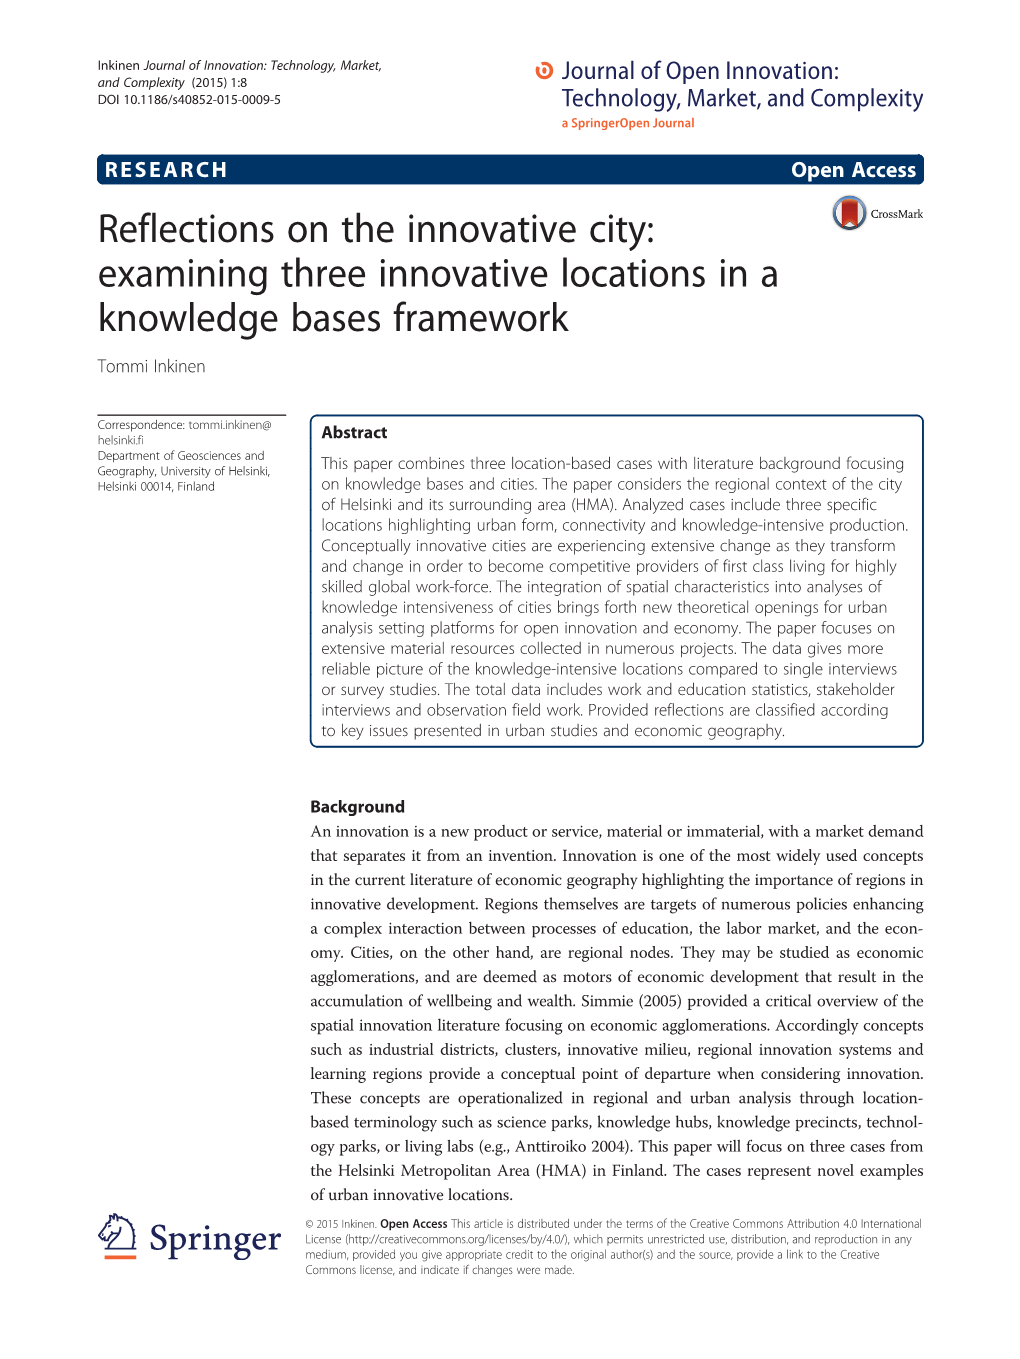 Reflections on the Innovative City: Examining Three Innovative Locations in a Knowledge Bases Framework Tommi Inkinen